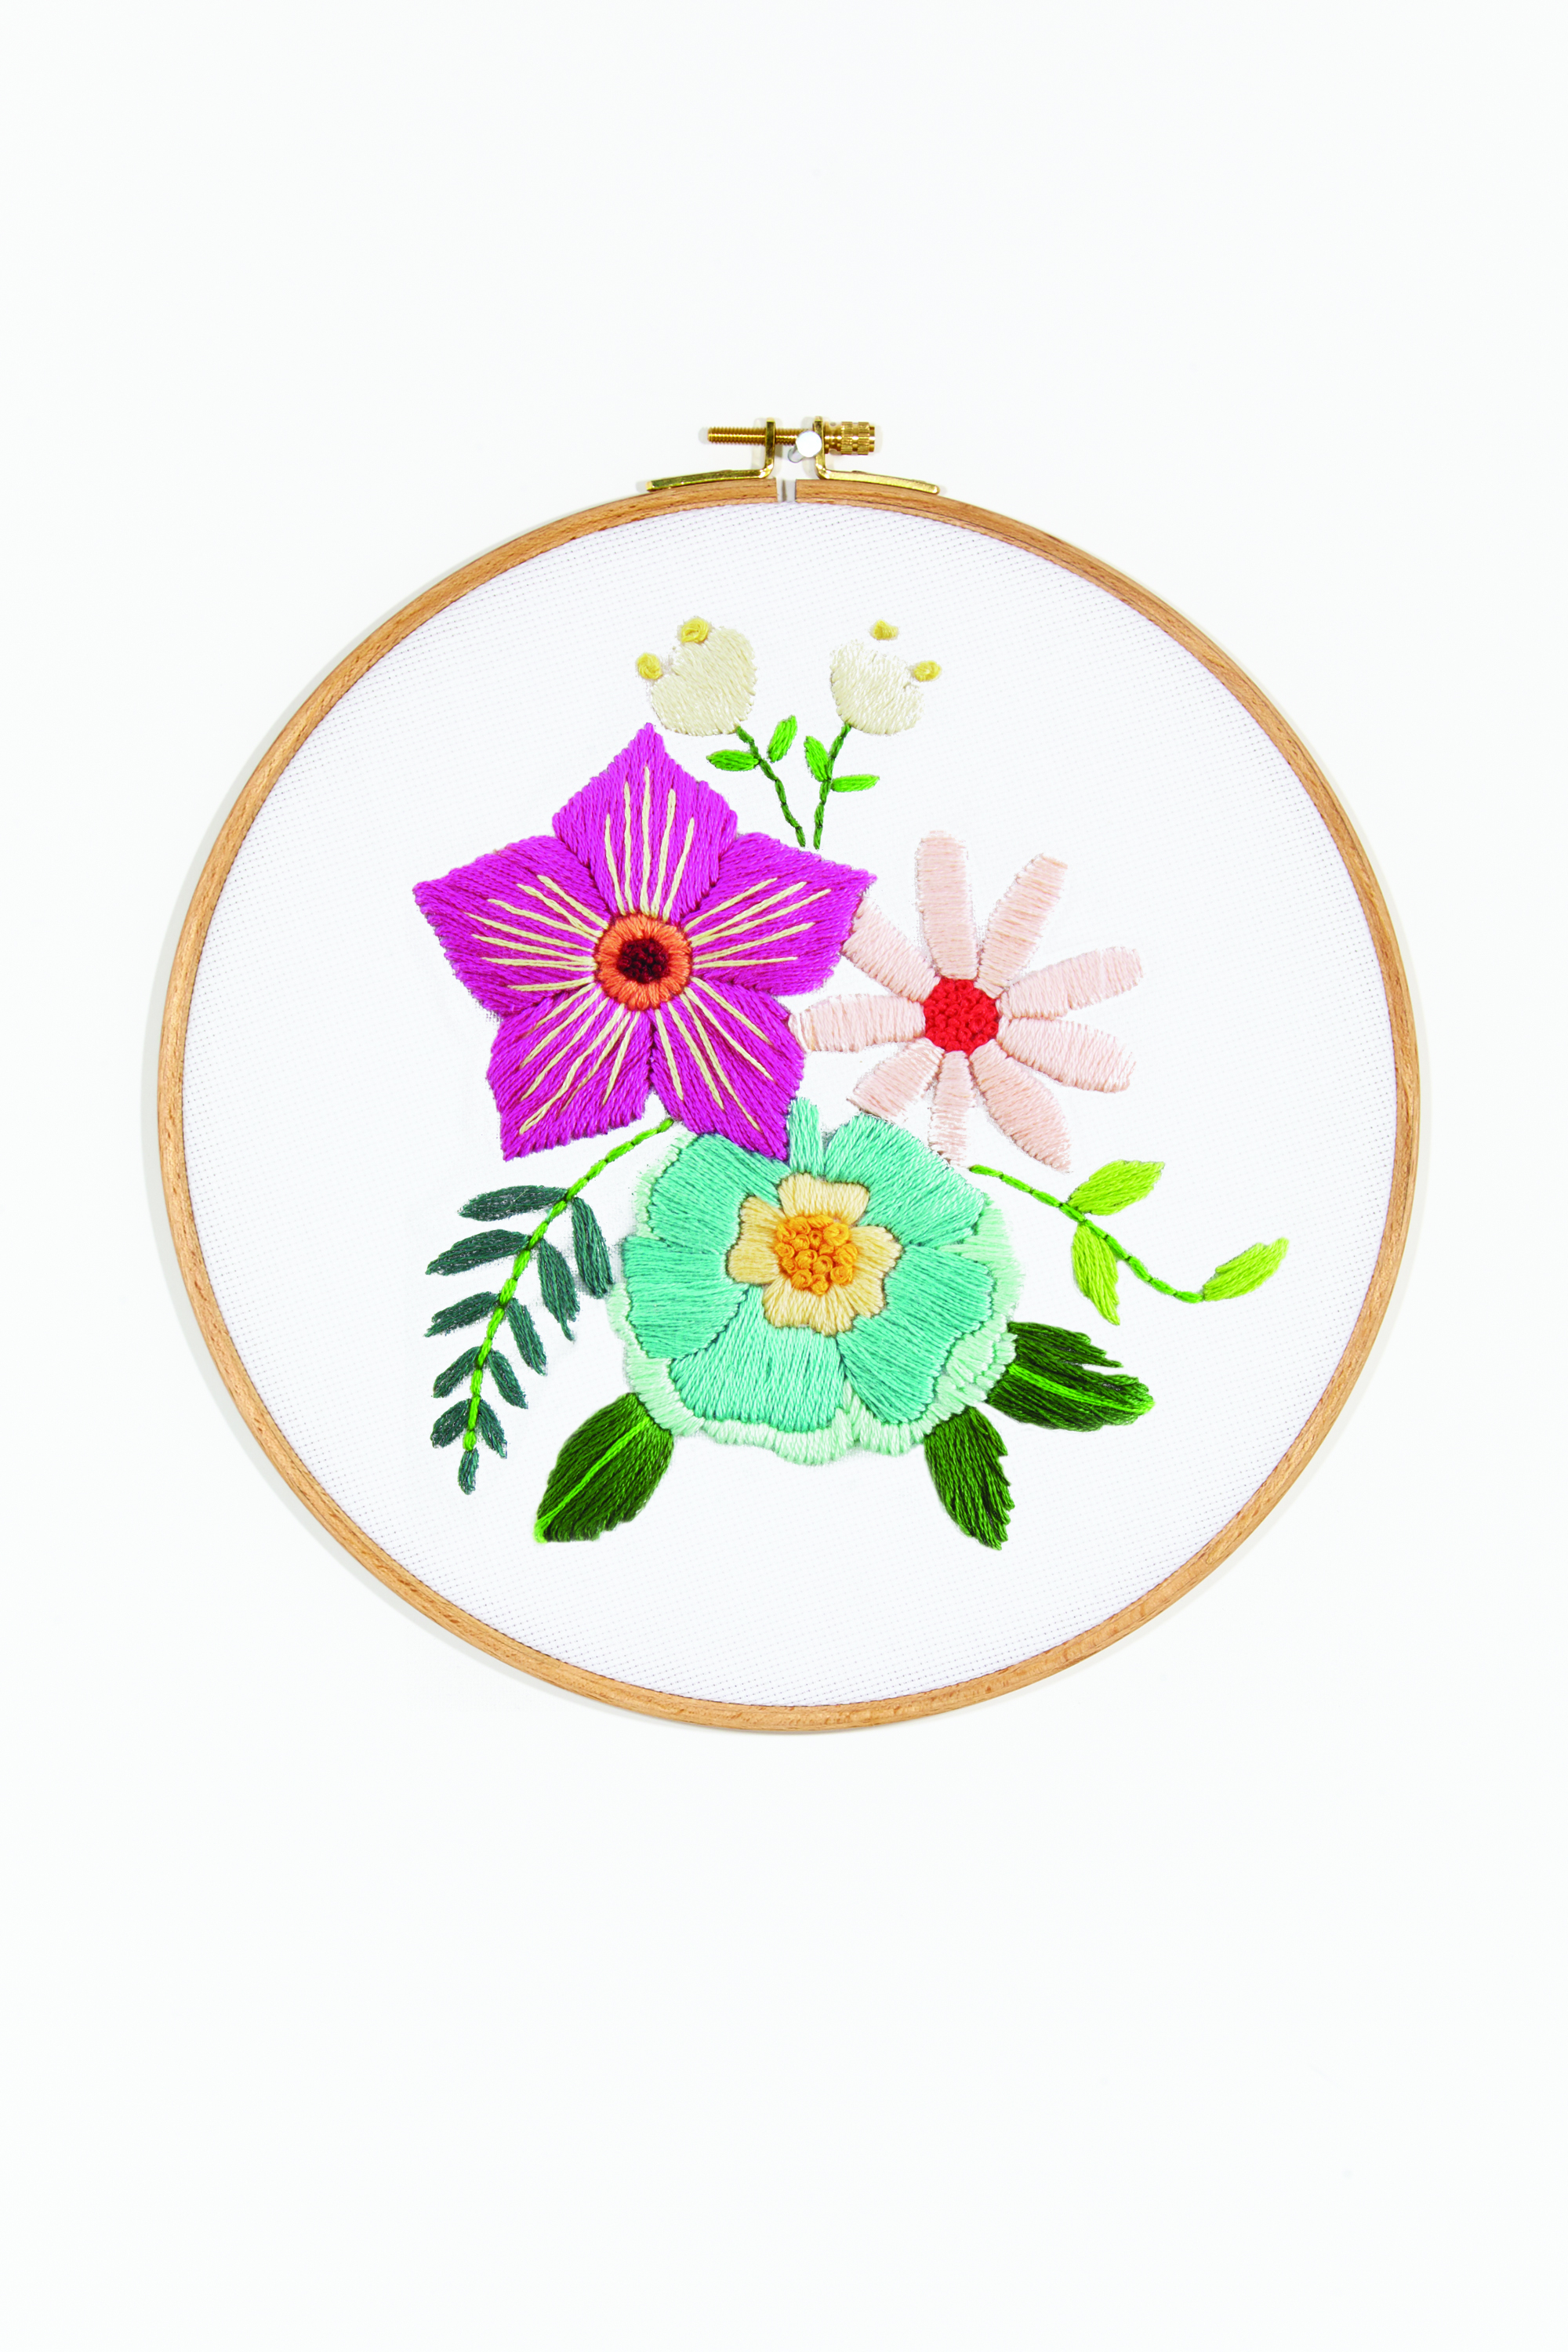 Dmc Embroidery Patterns The Floral Bouquet Embroidery Pattern